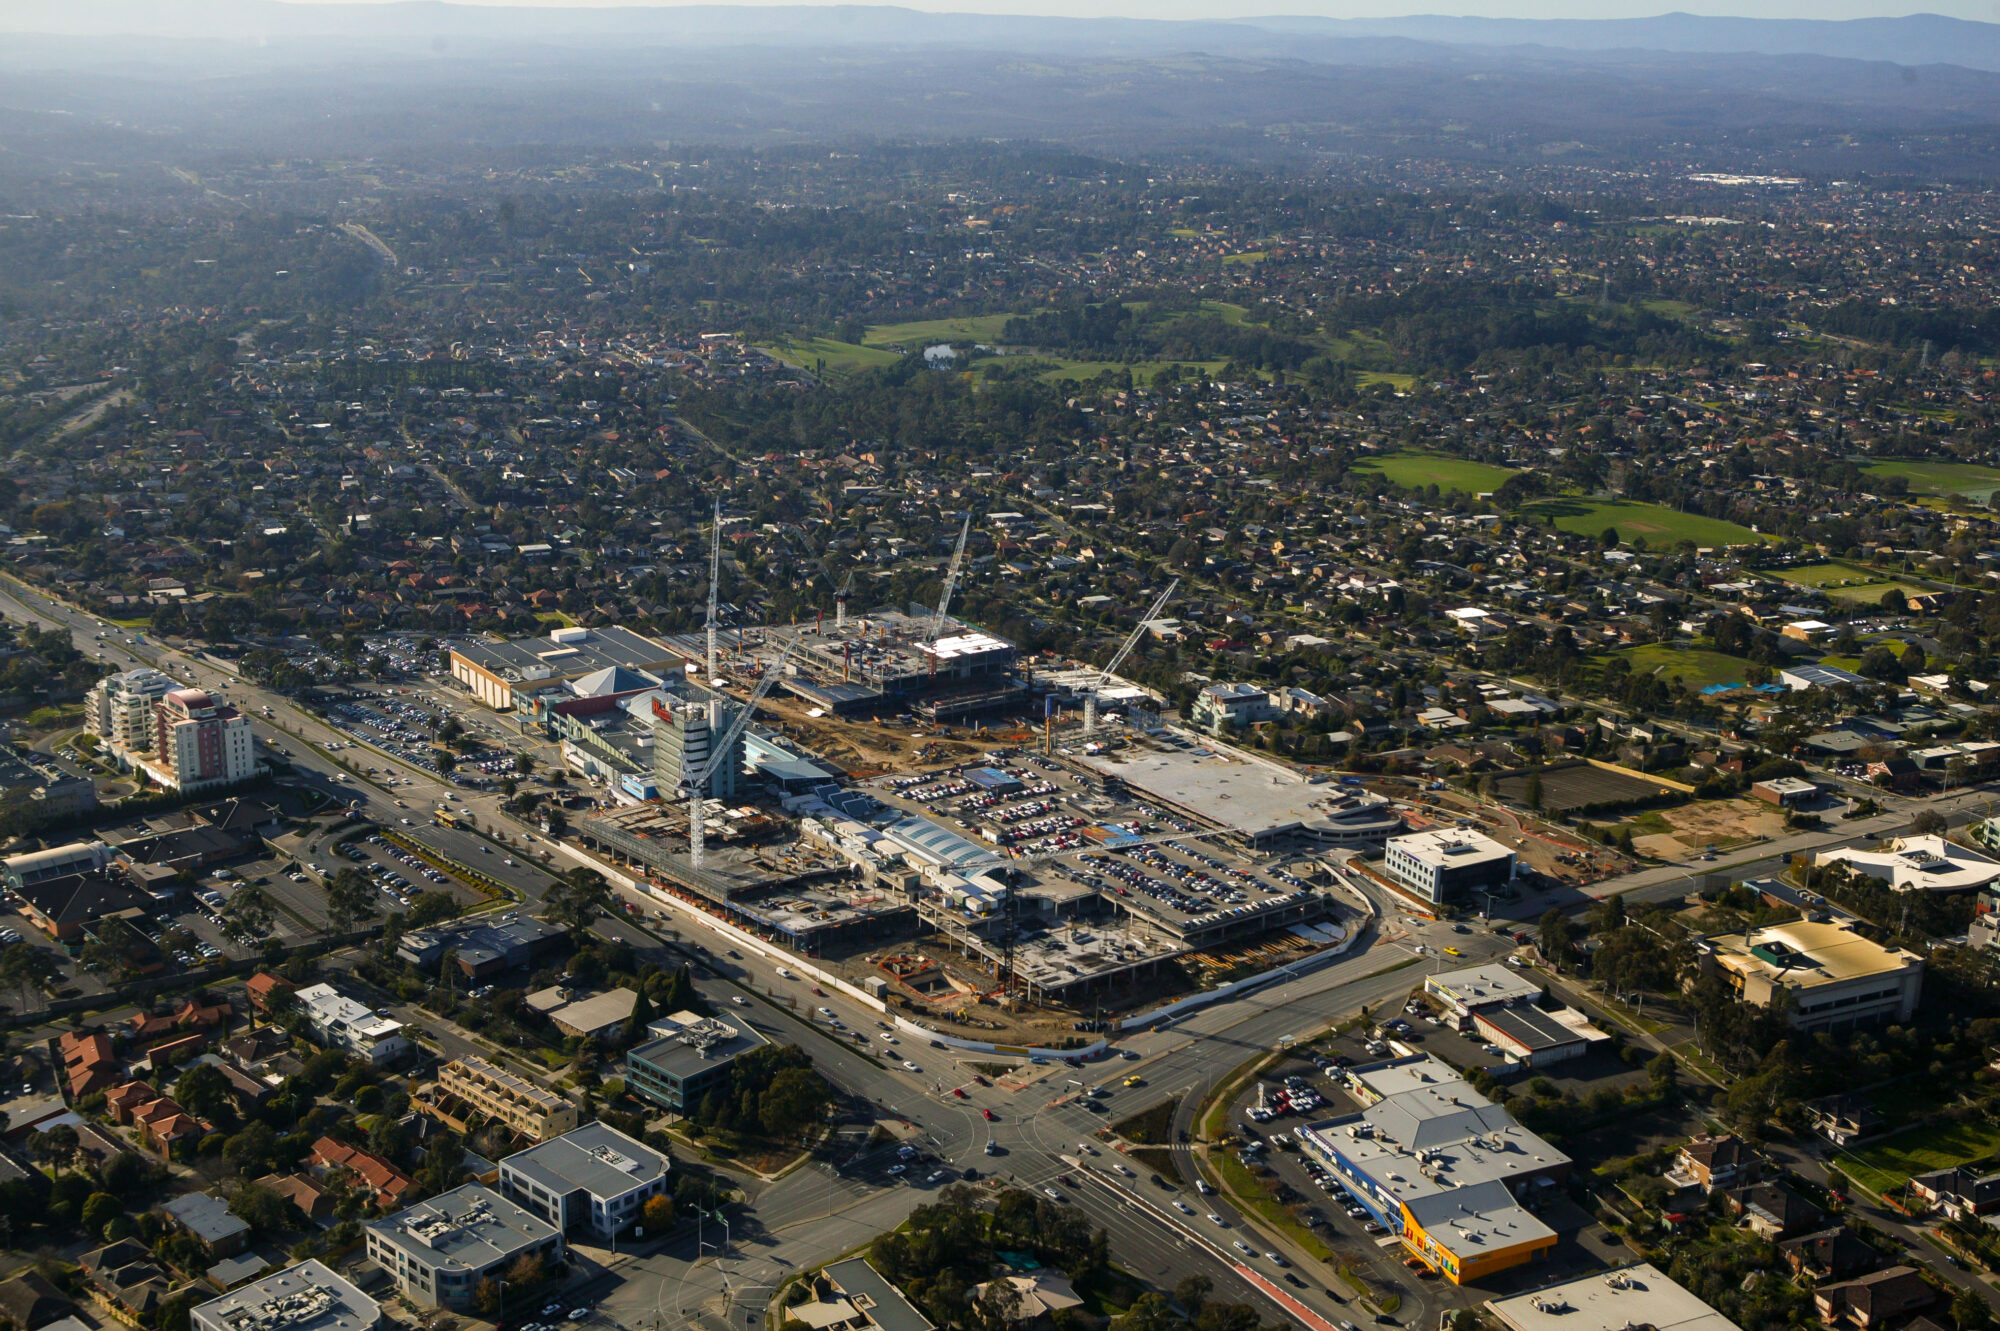 Aerial view of Doncaster Westfield 'Shoppingtown' taken in 2006.